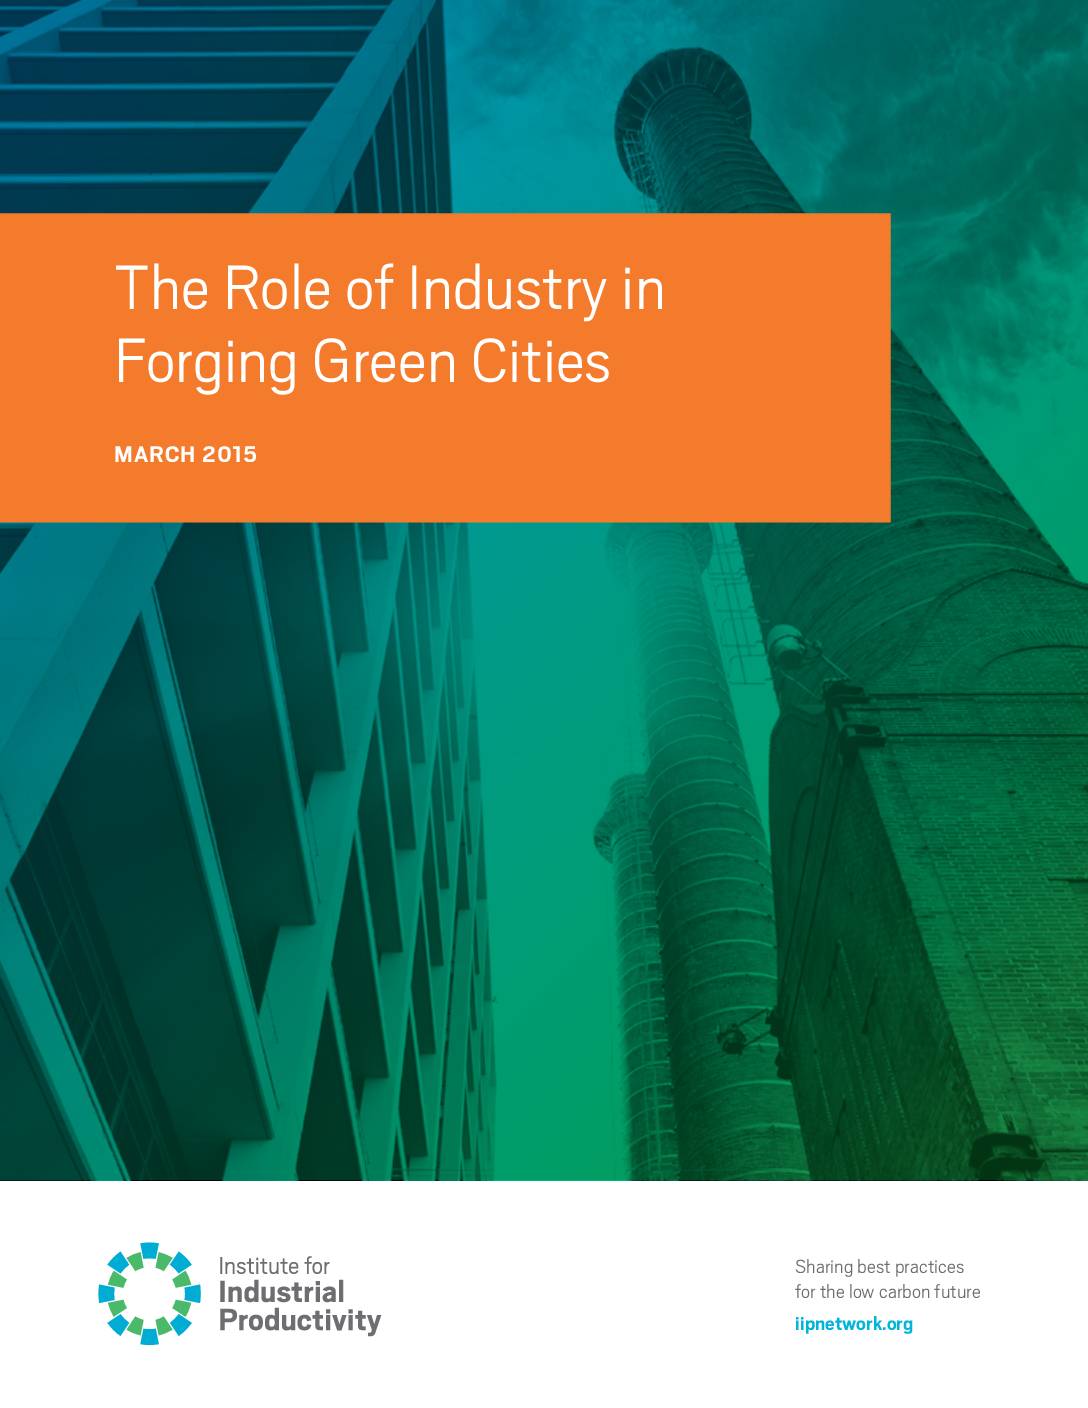 The Role of Industry in Forging Green Cities